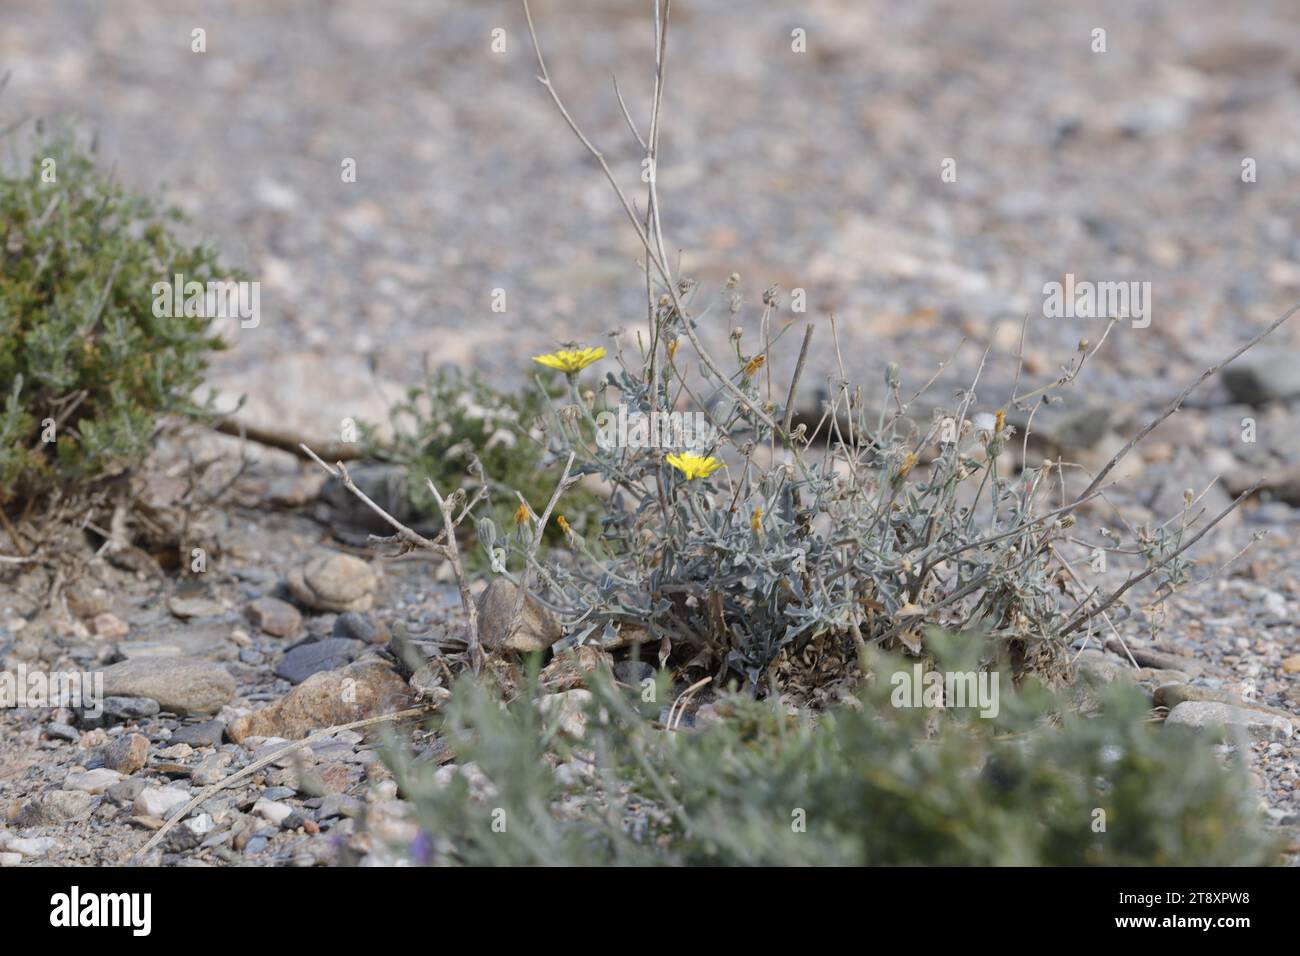 Blooming flowers on dry soil in the Almanzora Valley, Almeria, Spain Stock Photo